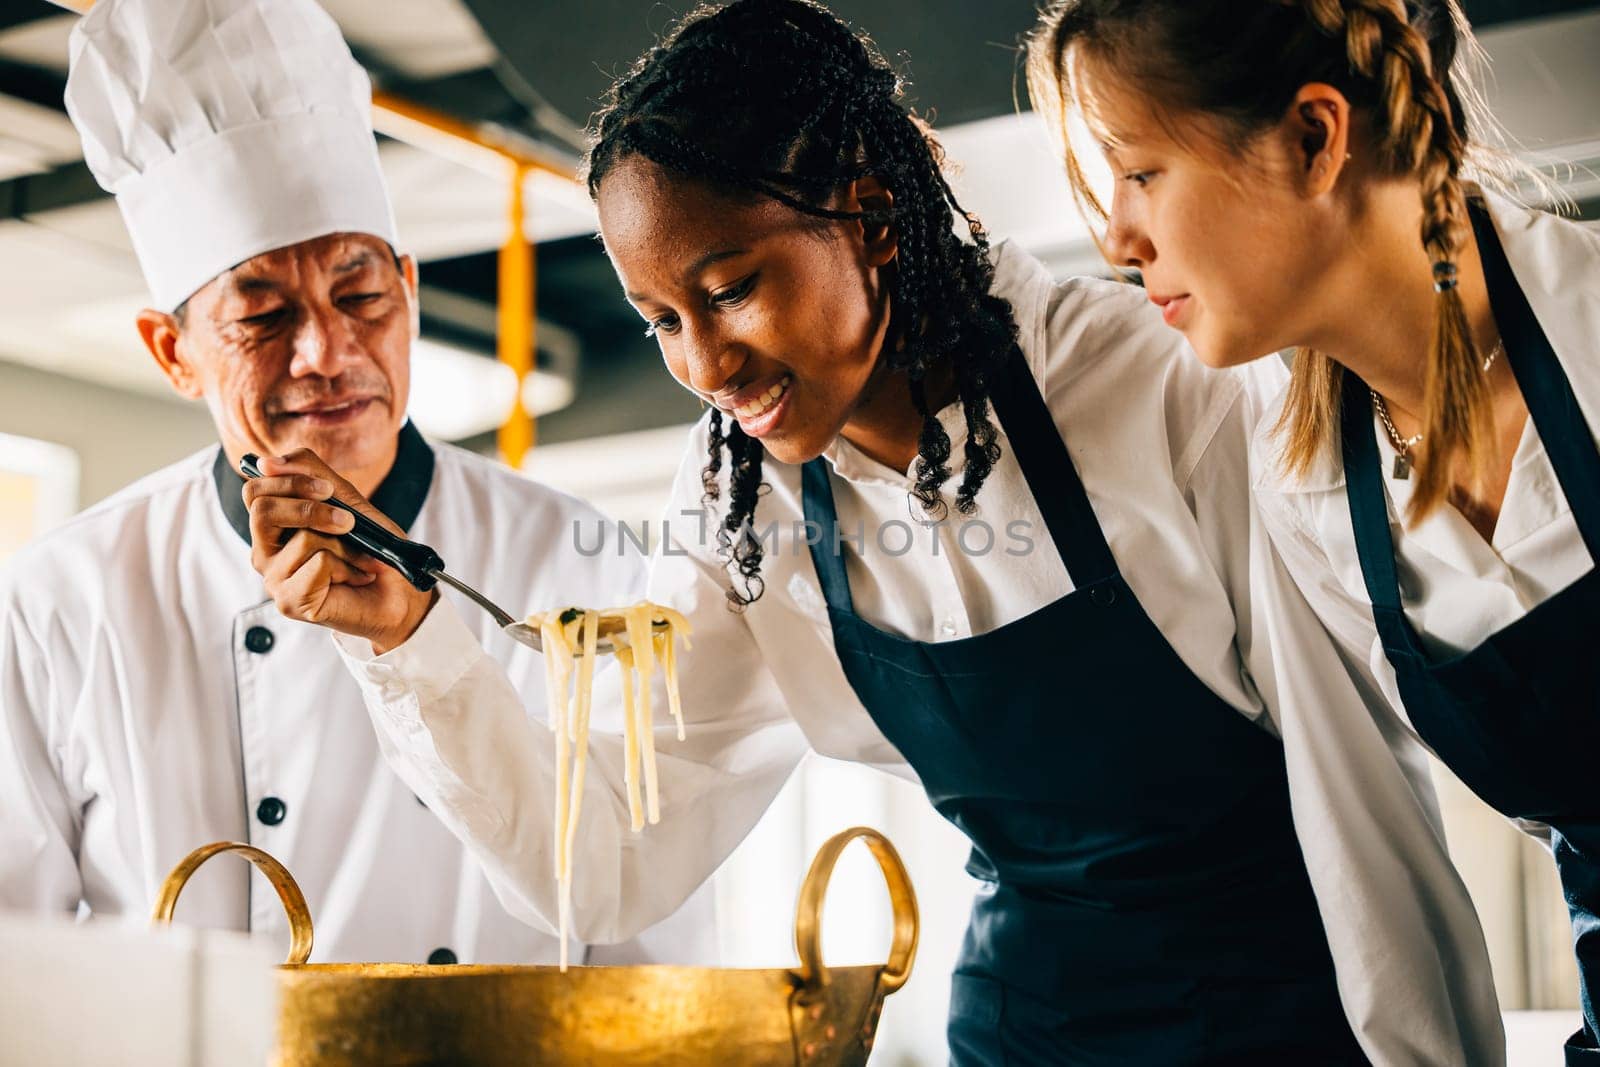 In kitchen chef teaches noodle cooking to students. Schoolgirls make ramen soup. Teacher guides kids at stove. Modern education in joyful dinner preparation. Foor Education Concept